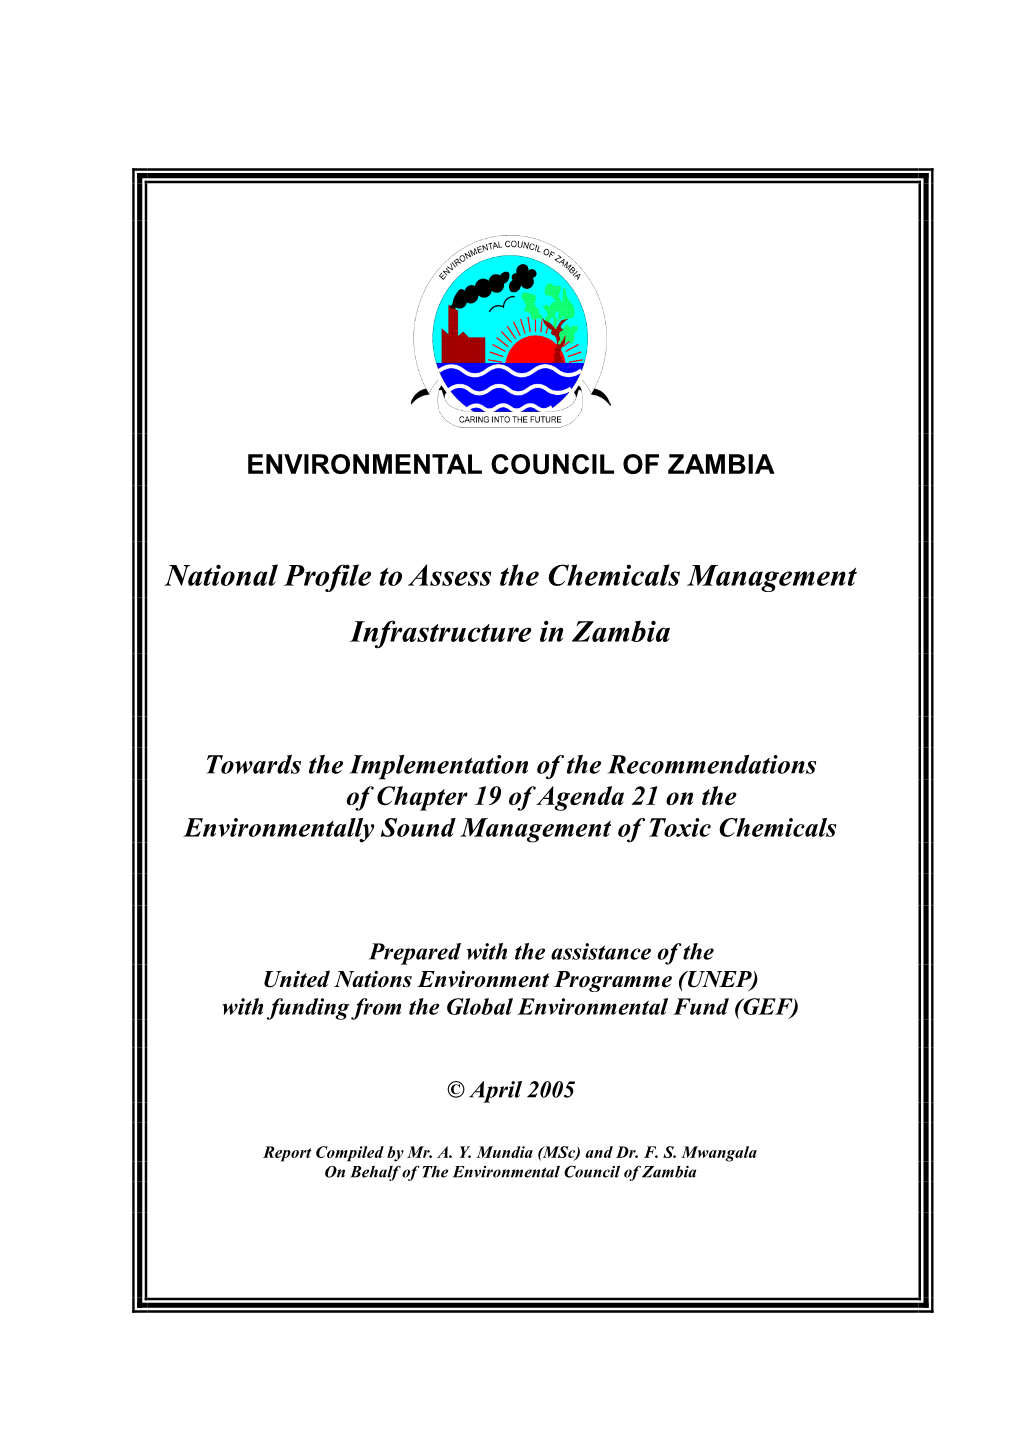 National Profile to Assess the Chemicals Management Infrastructure in Zambia